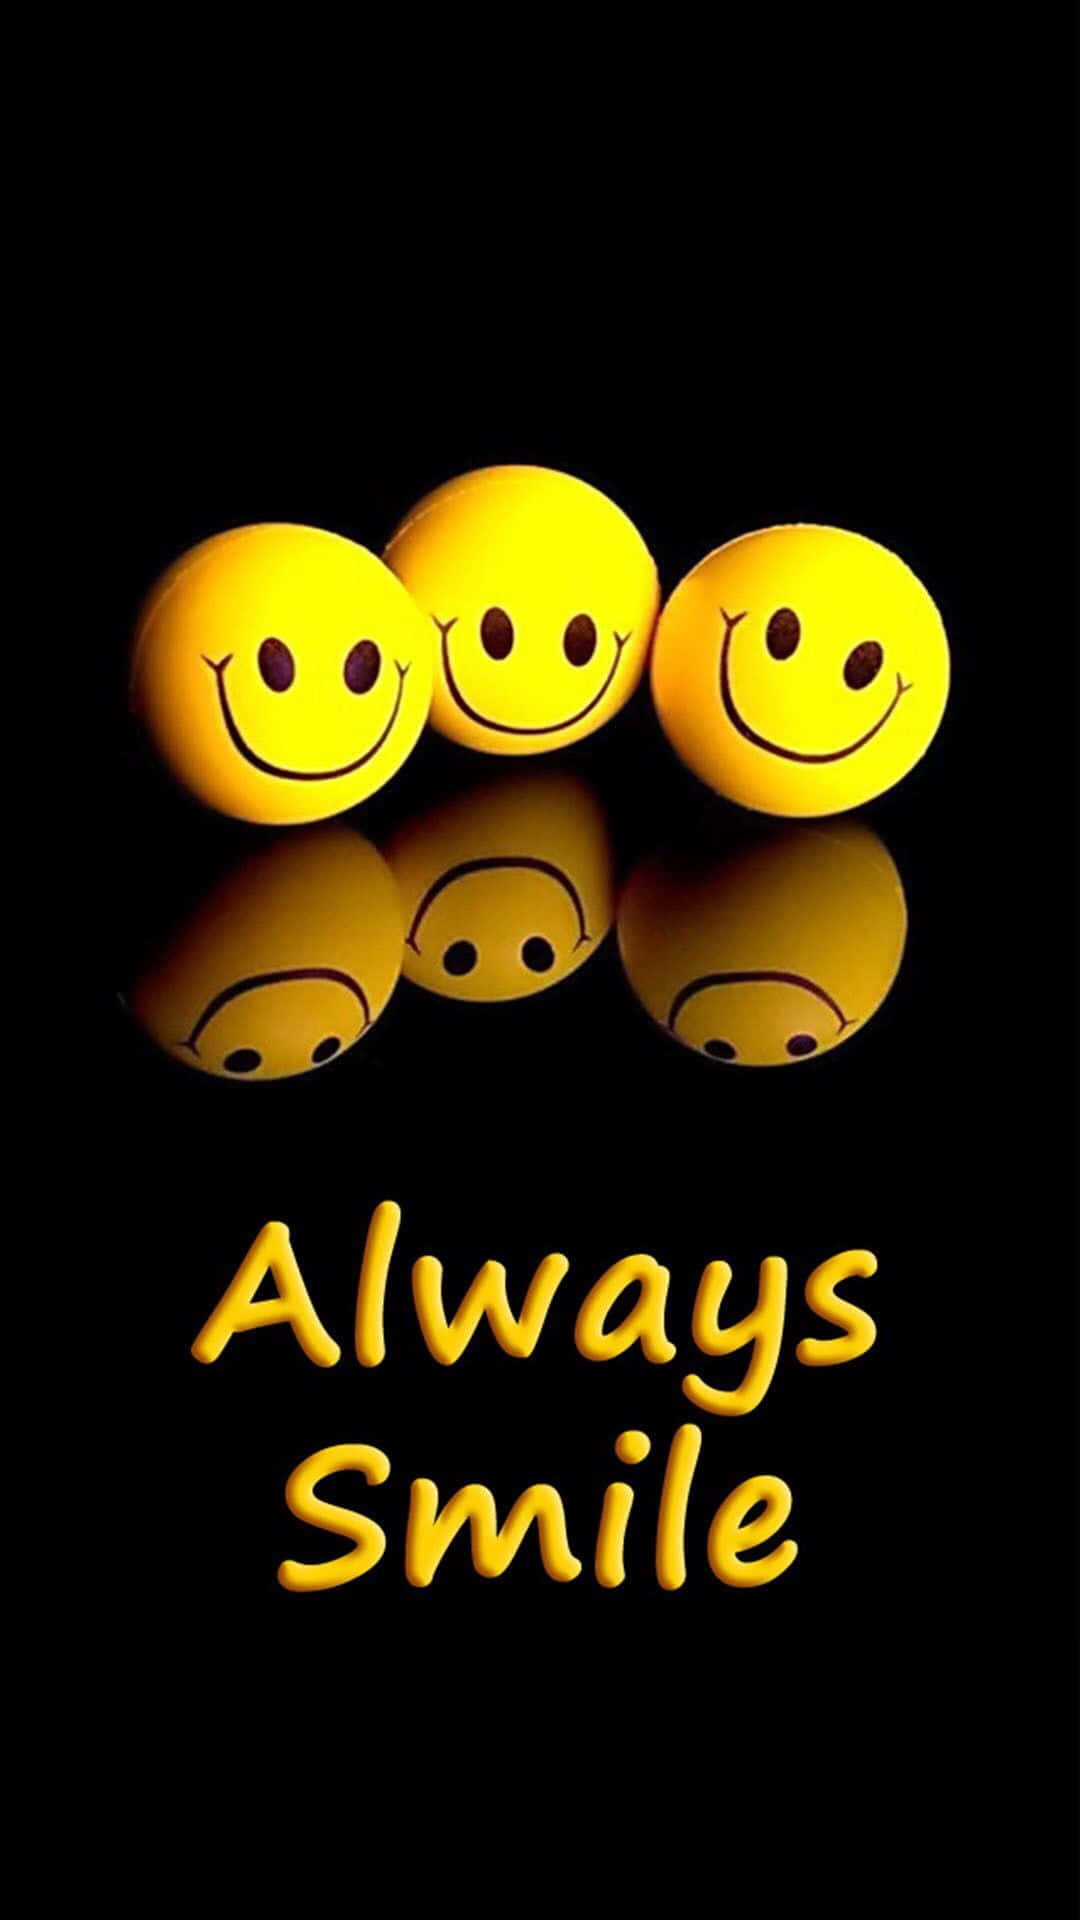 Yellow Circle With Happy Smile Face Background